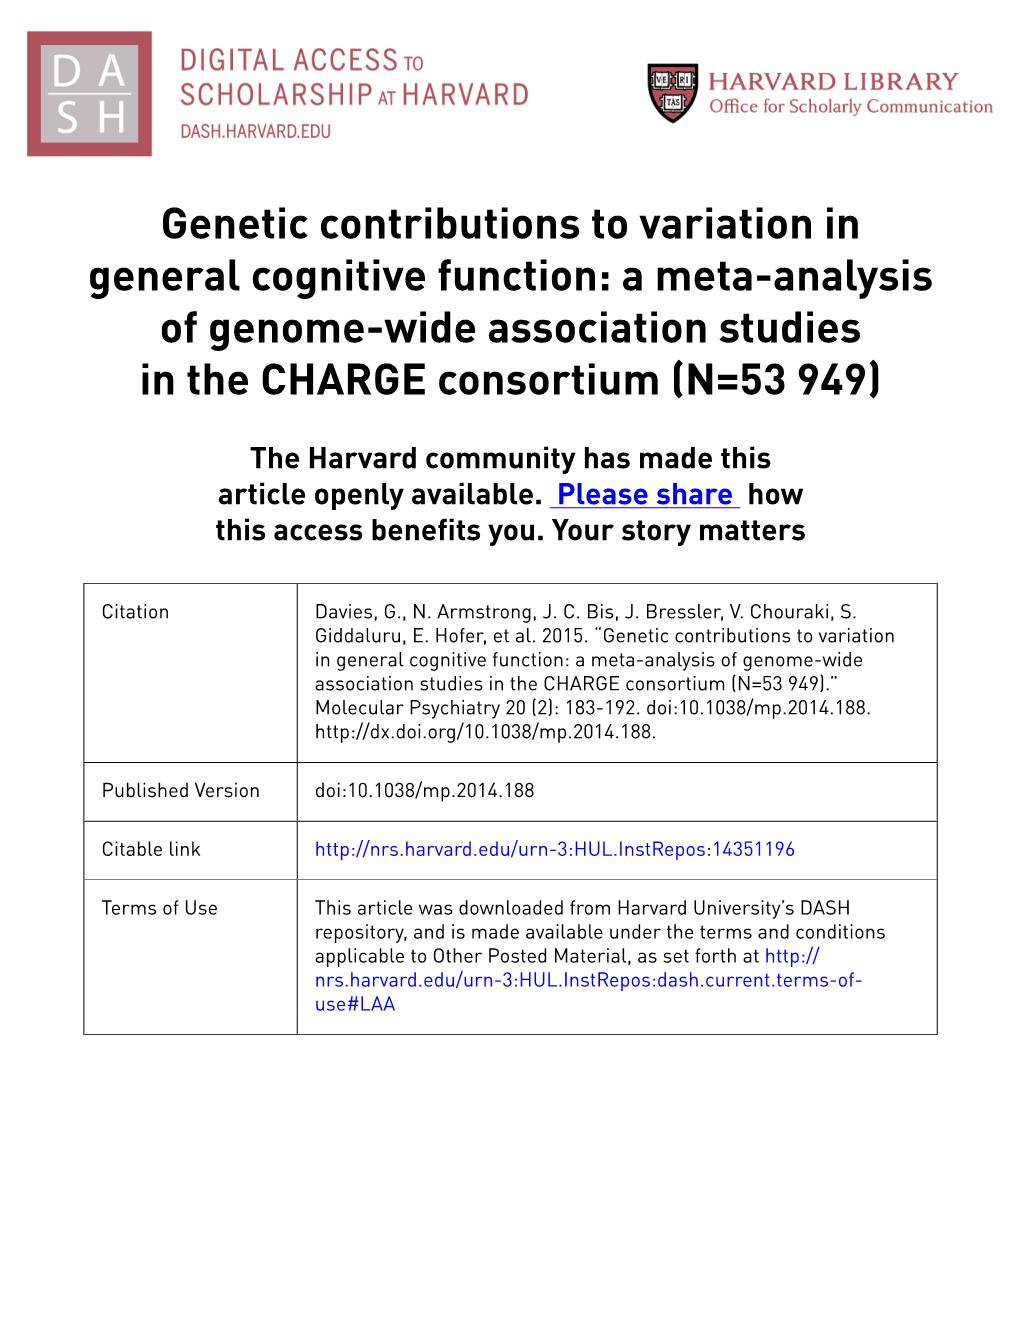 Genetic Contributions to Variation in General Cognitive Function: a Meta-Analysis of Genome-Wide Association Studies in the CHARGE Consortium (N=53 949)